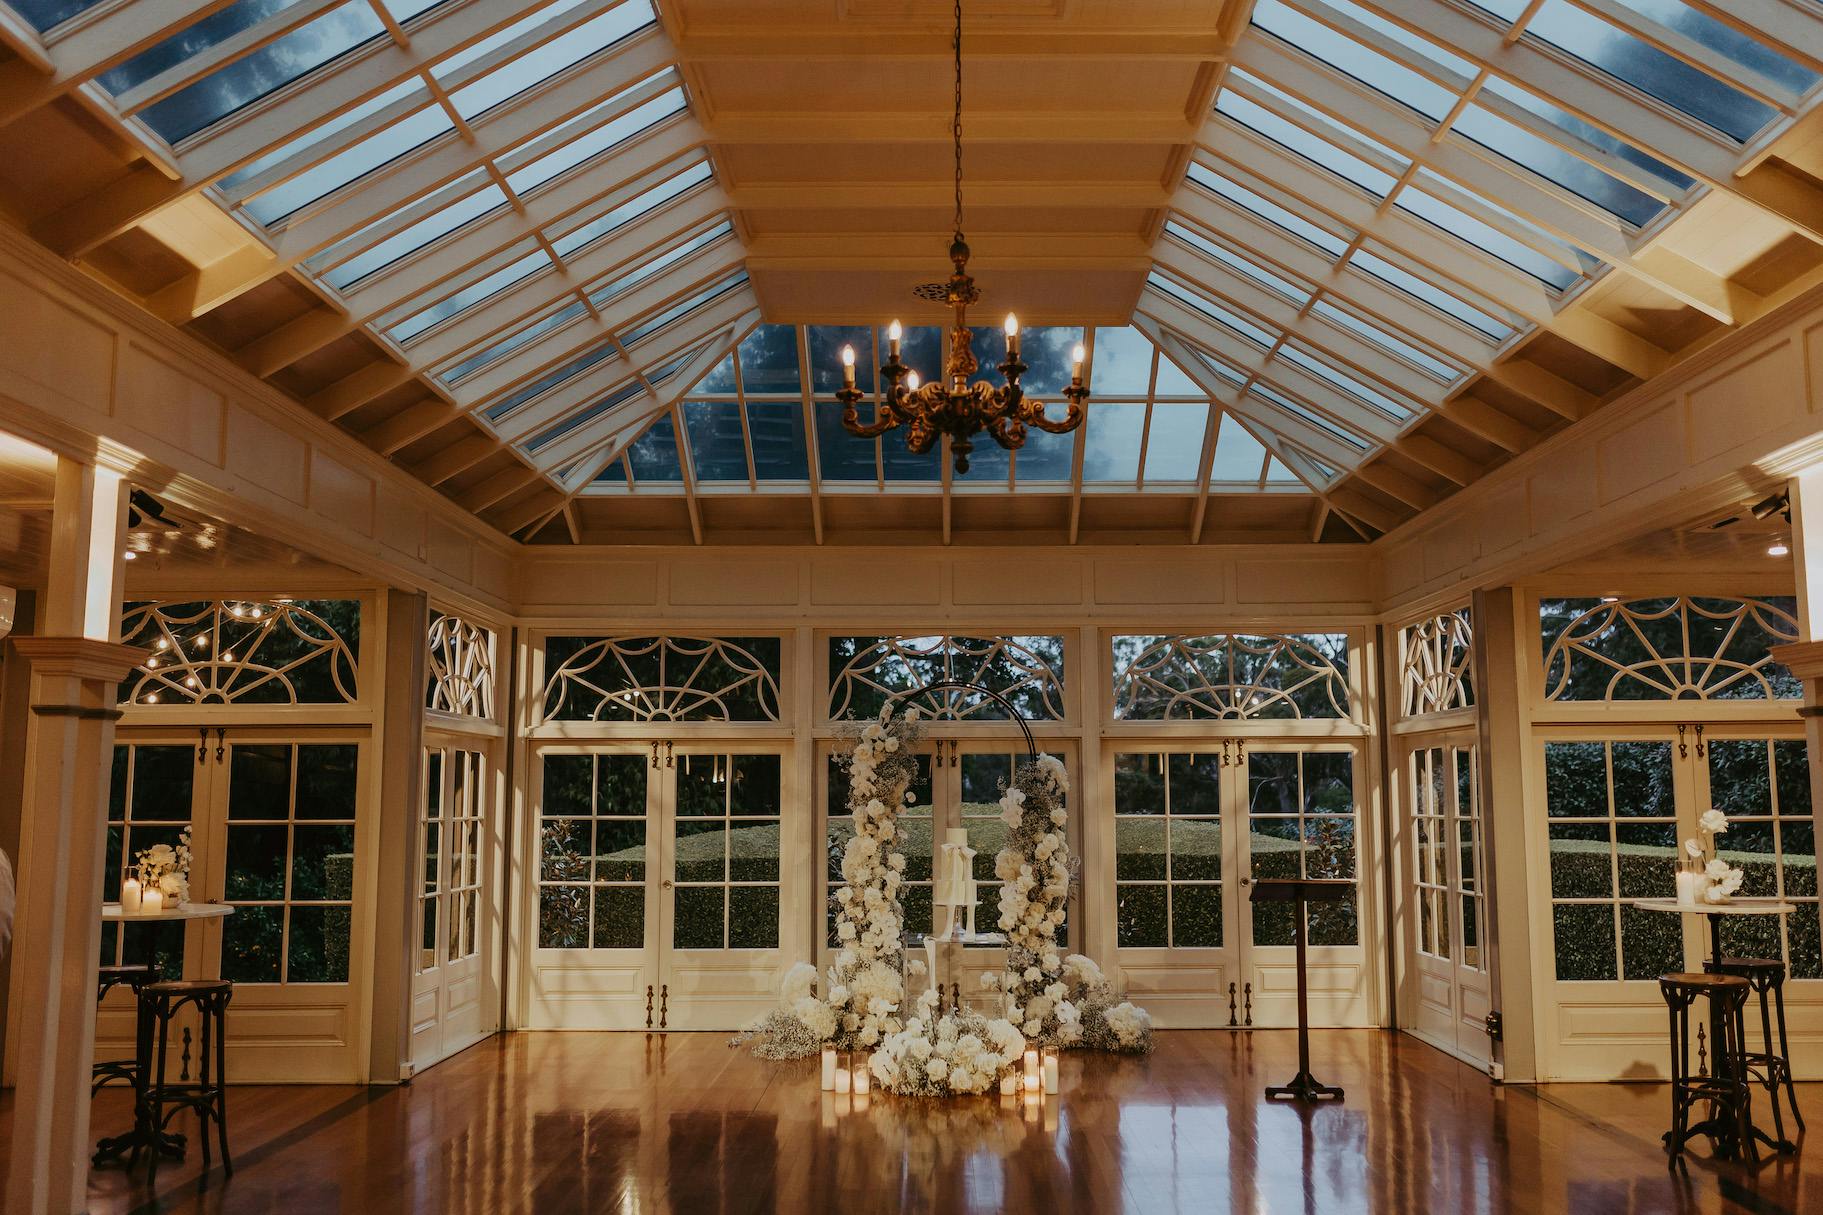 A spacious, elegant room with a glass ceiling and chandelier. Large windows and French doors create a bright atmosphere. White floral arrangements with candles surround a central display on a polished wood floor, ready for a formal event or ceremony.